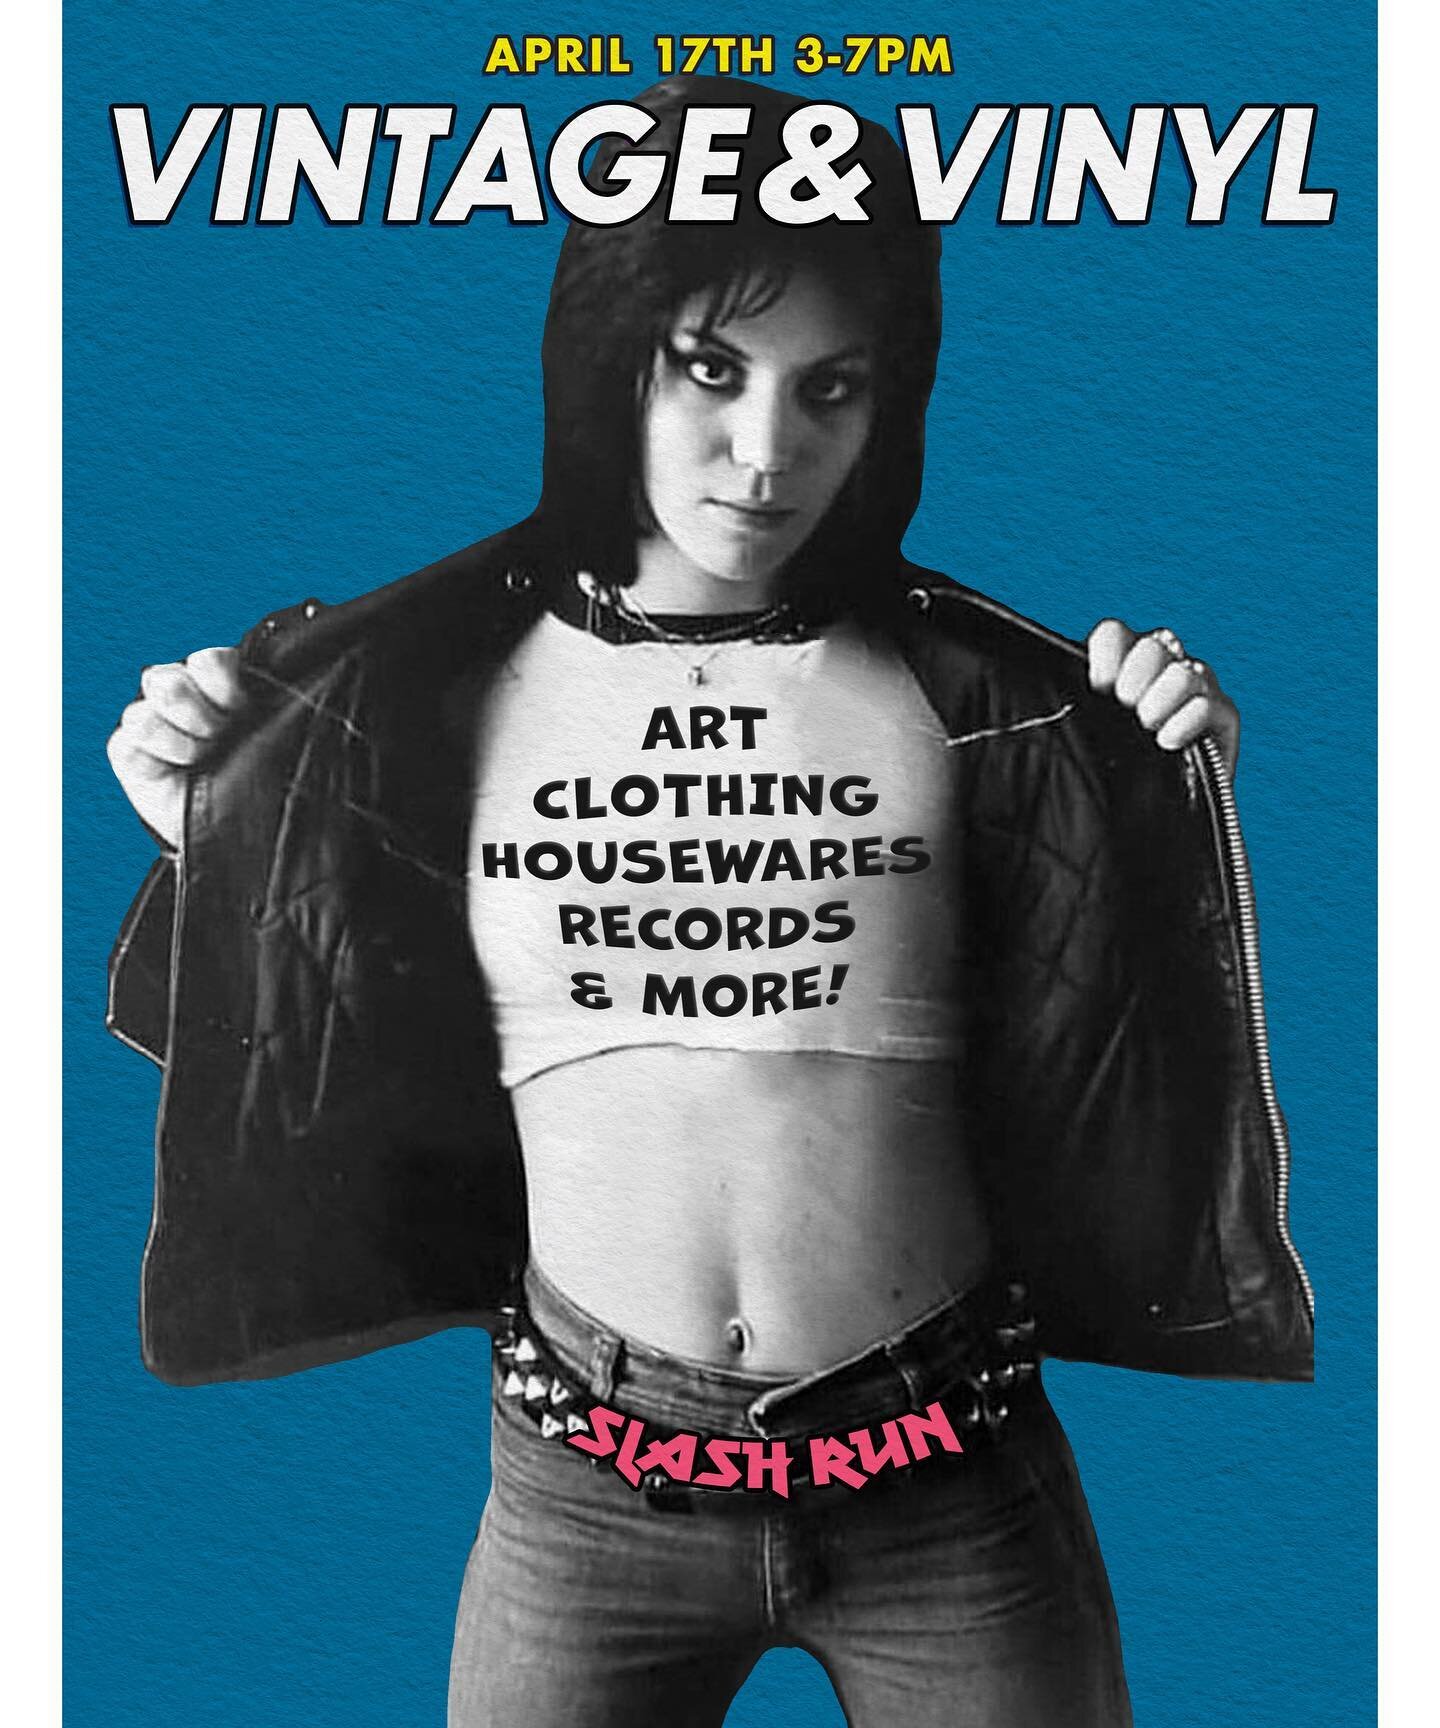 hey fans here&rsquo;s your next Vintage &amp; Vinyl !! Vendors please email bookingslashrun@gmail.com or hit me here!